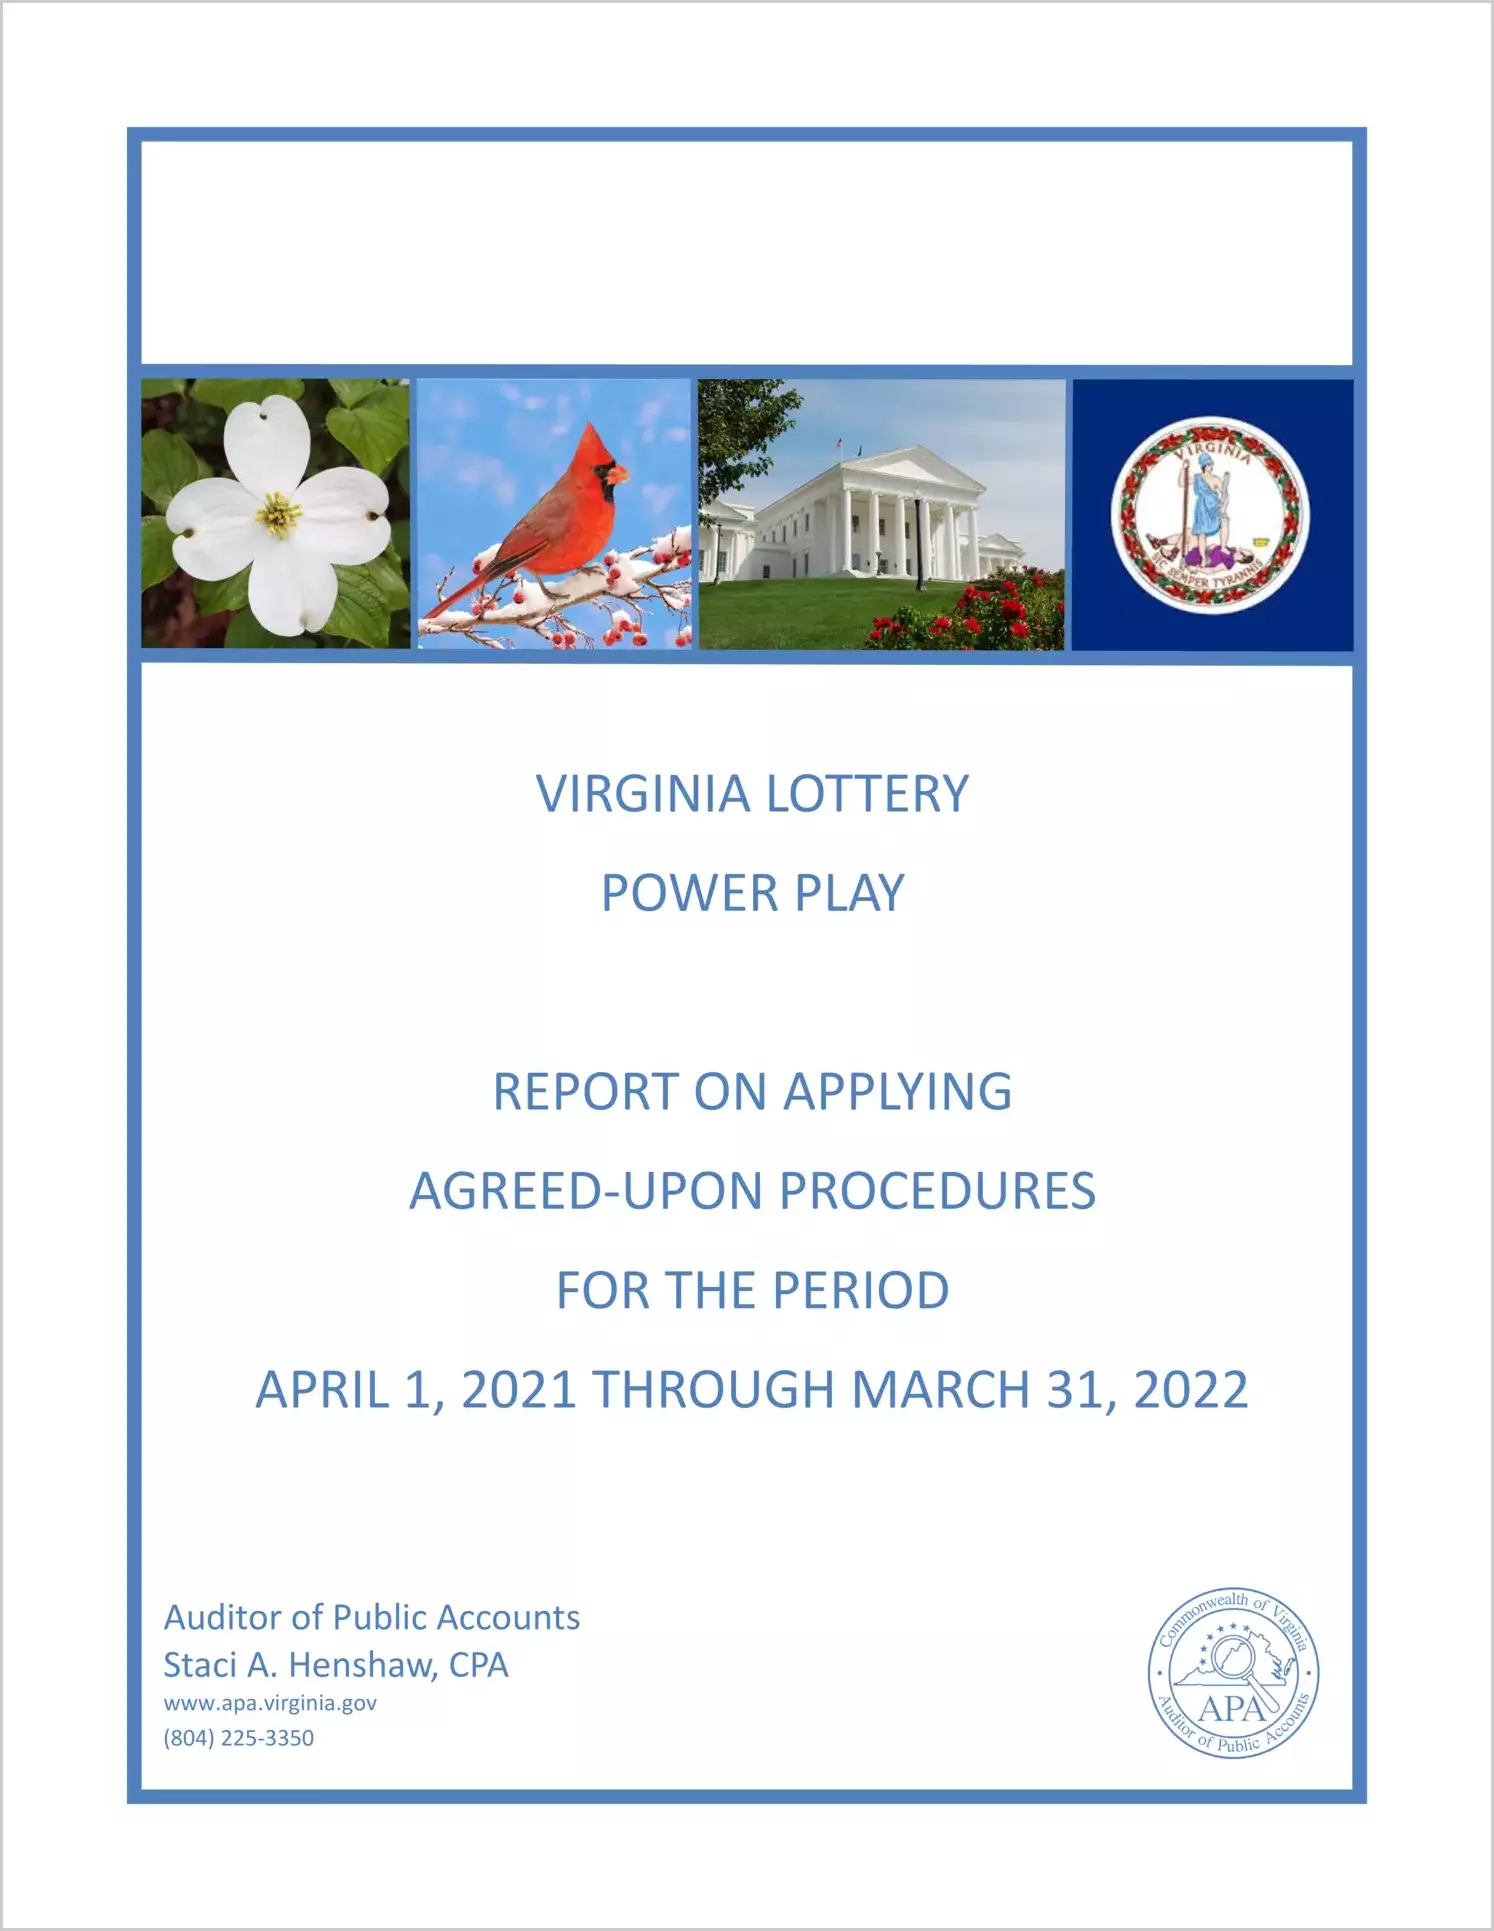 Virginia Lottery Power Play Report on Applying Agreed-Upon Procedures for the period April 1, 2021 through March 31, 2022